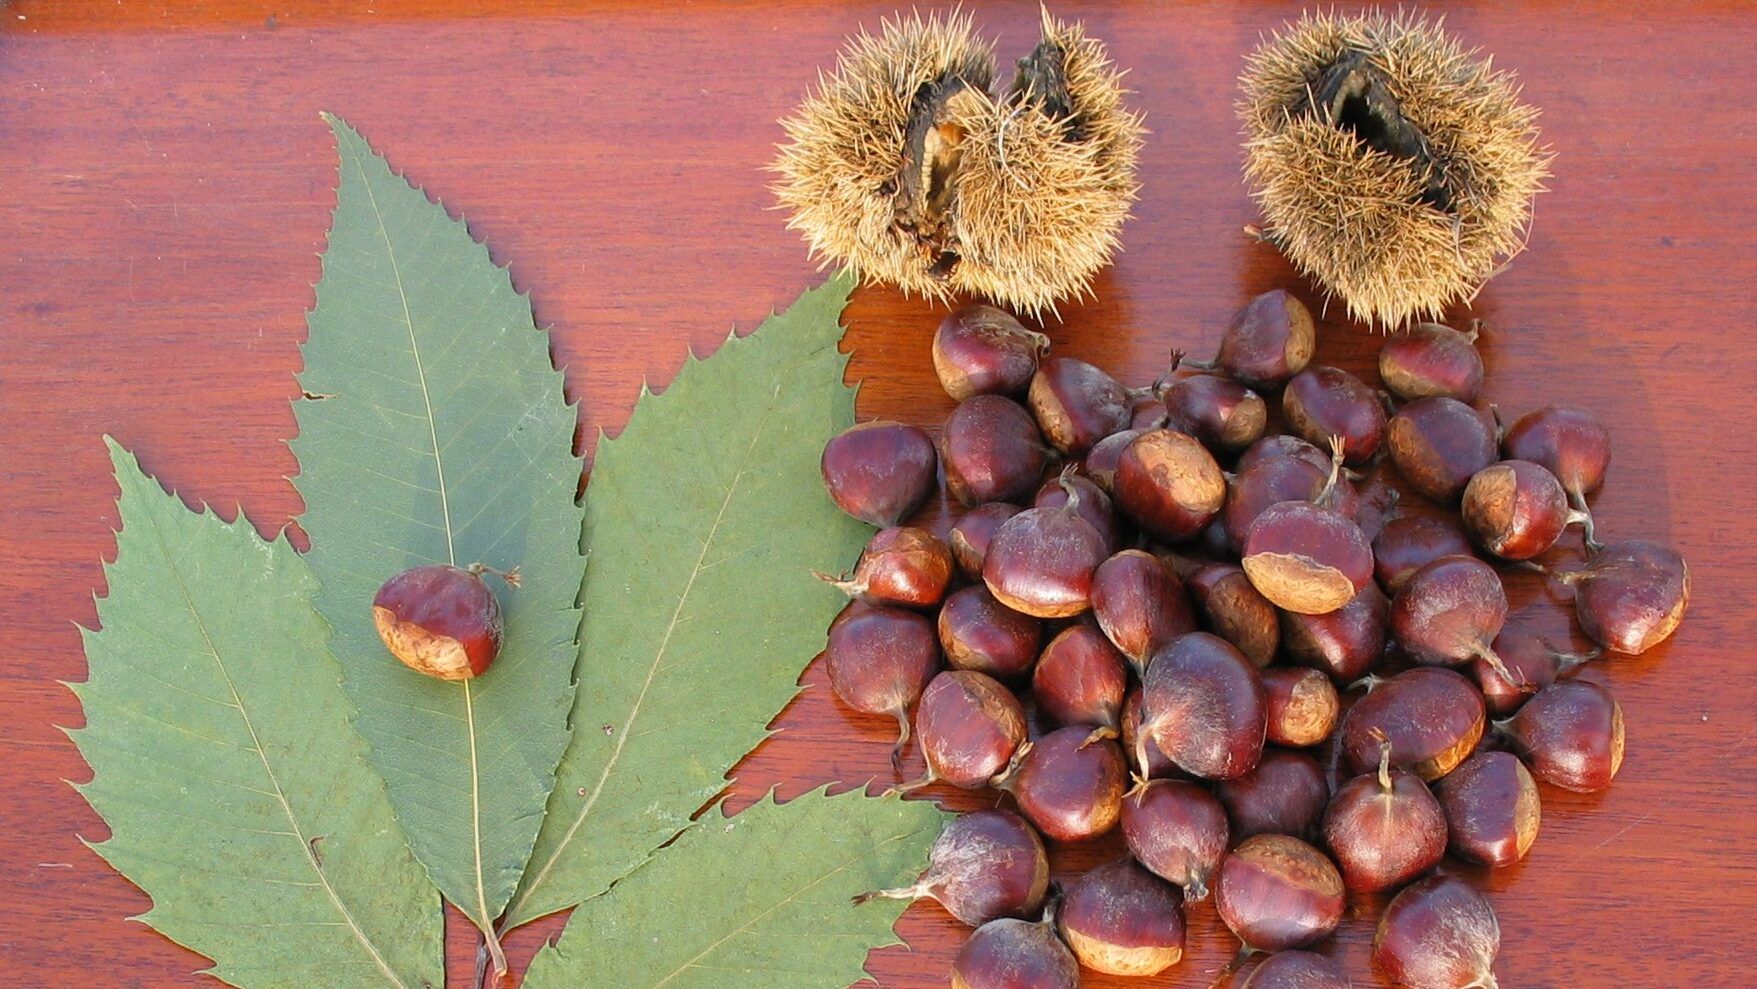 American Chestnut, Leaves, Catkins